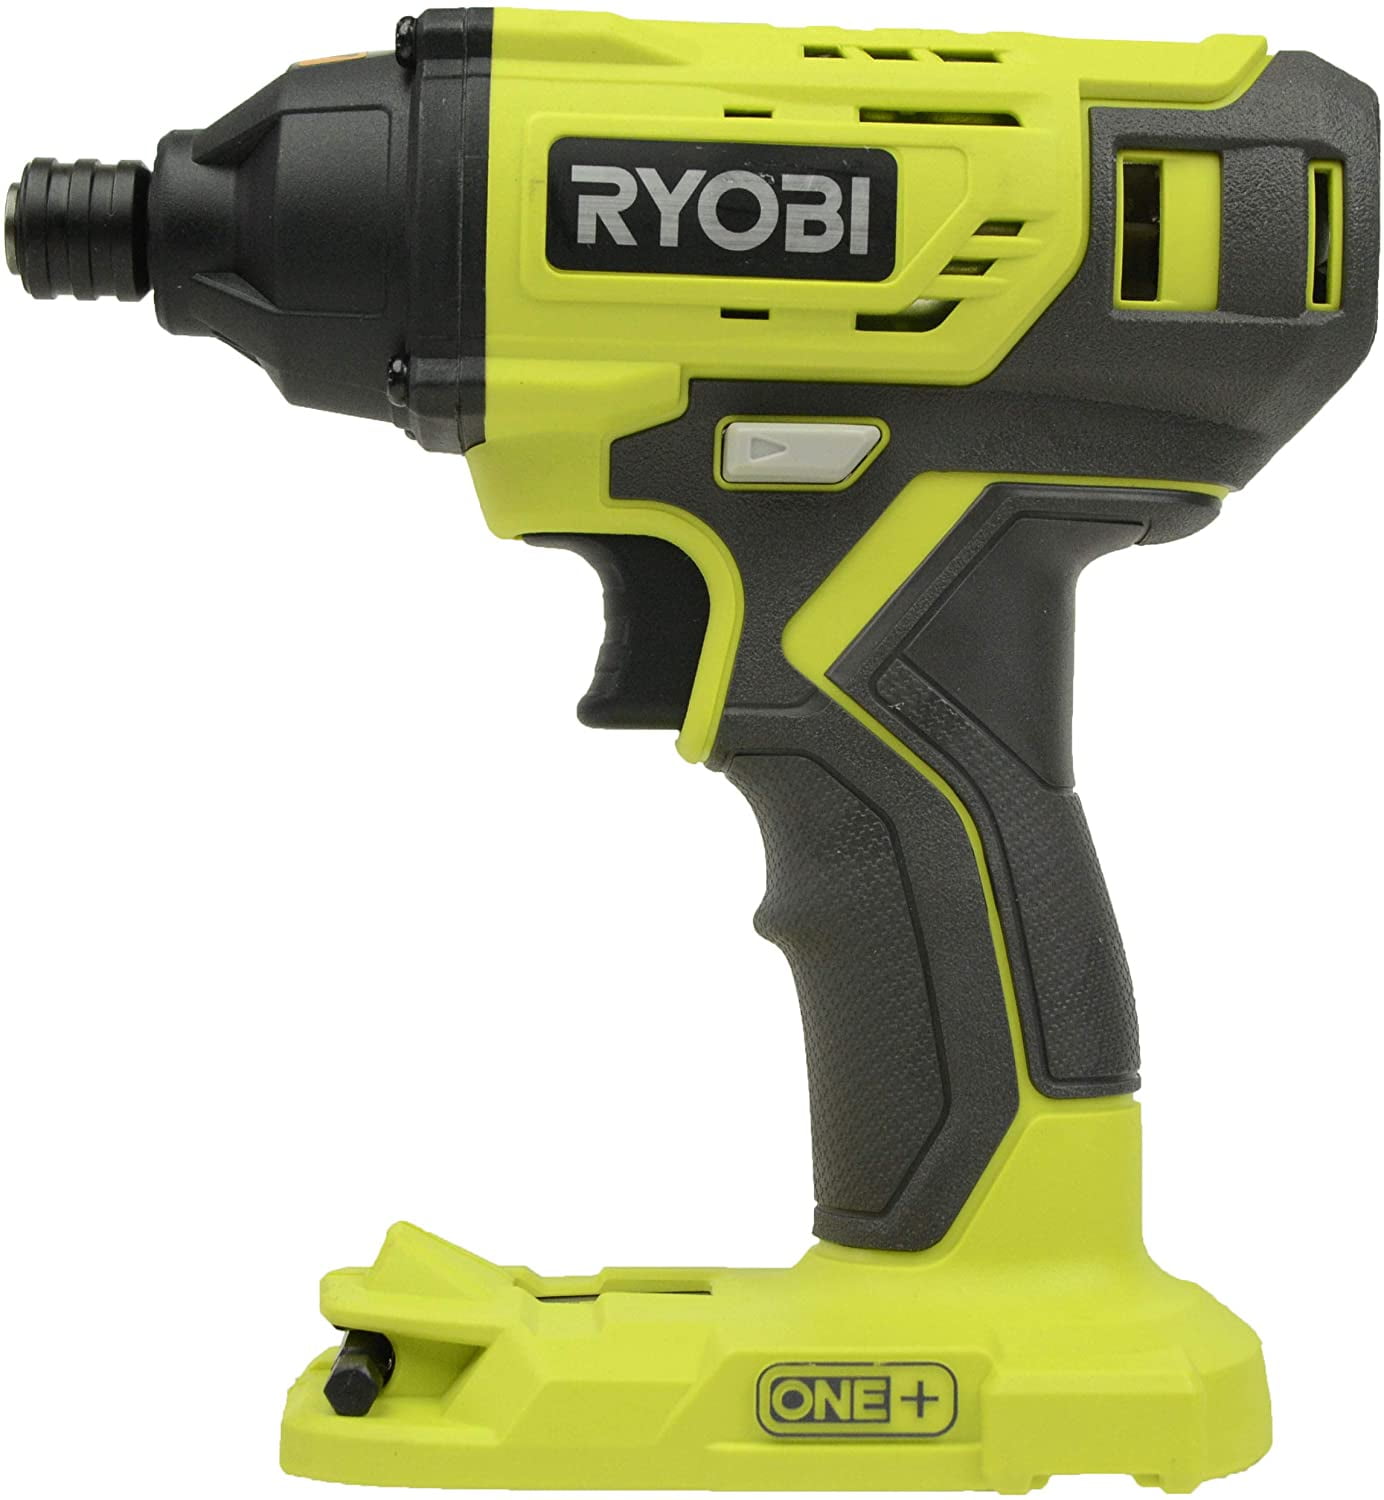 Ryobi D620H 5/8 inch Variable Speed Reversible Hammer Drill for sale online 